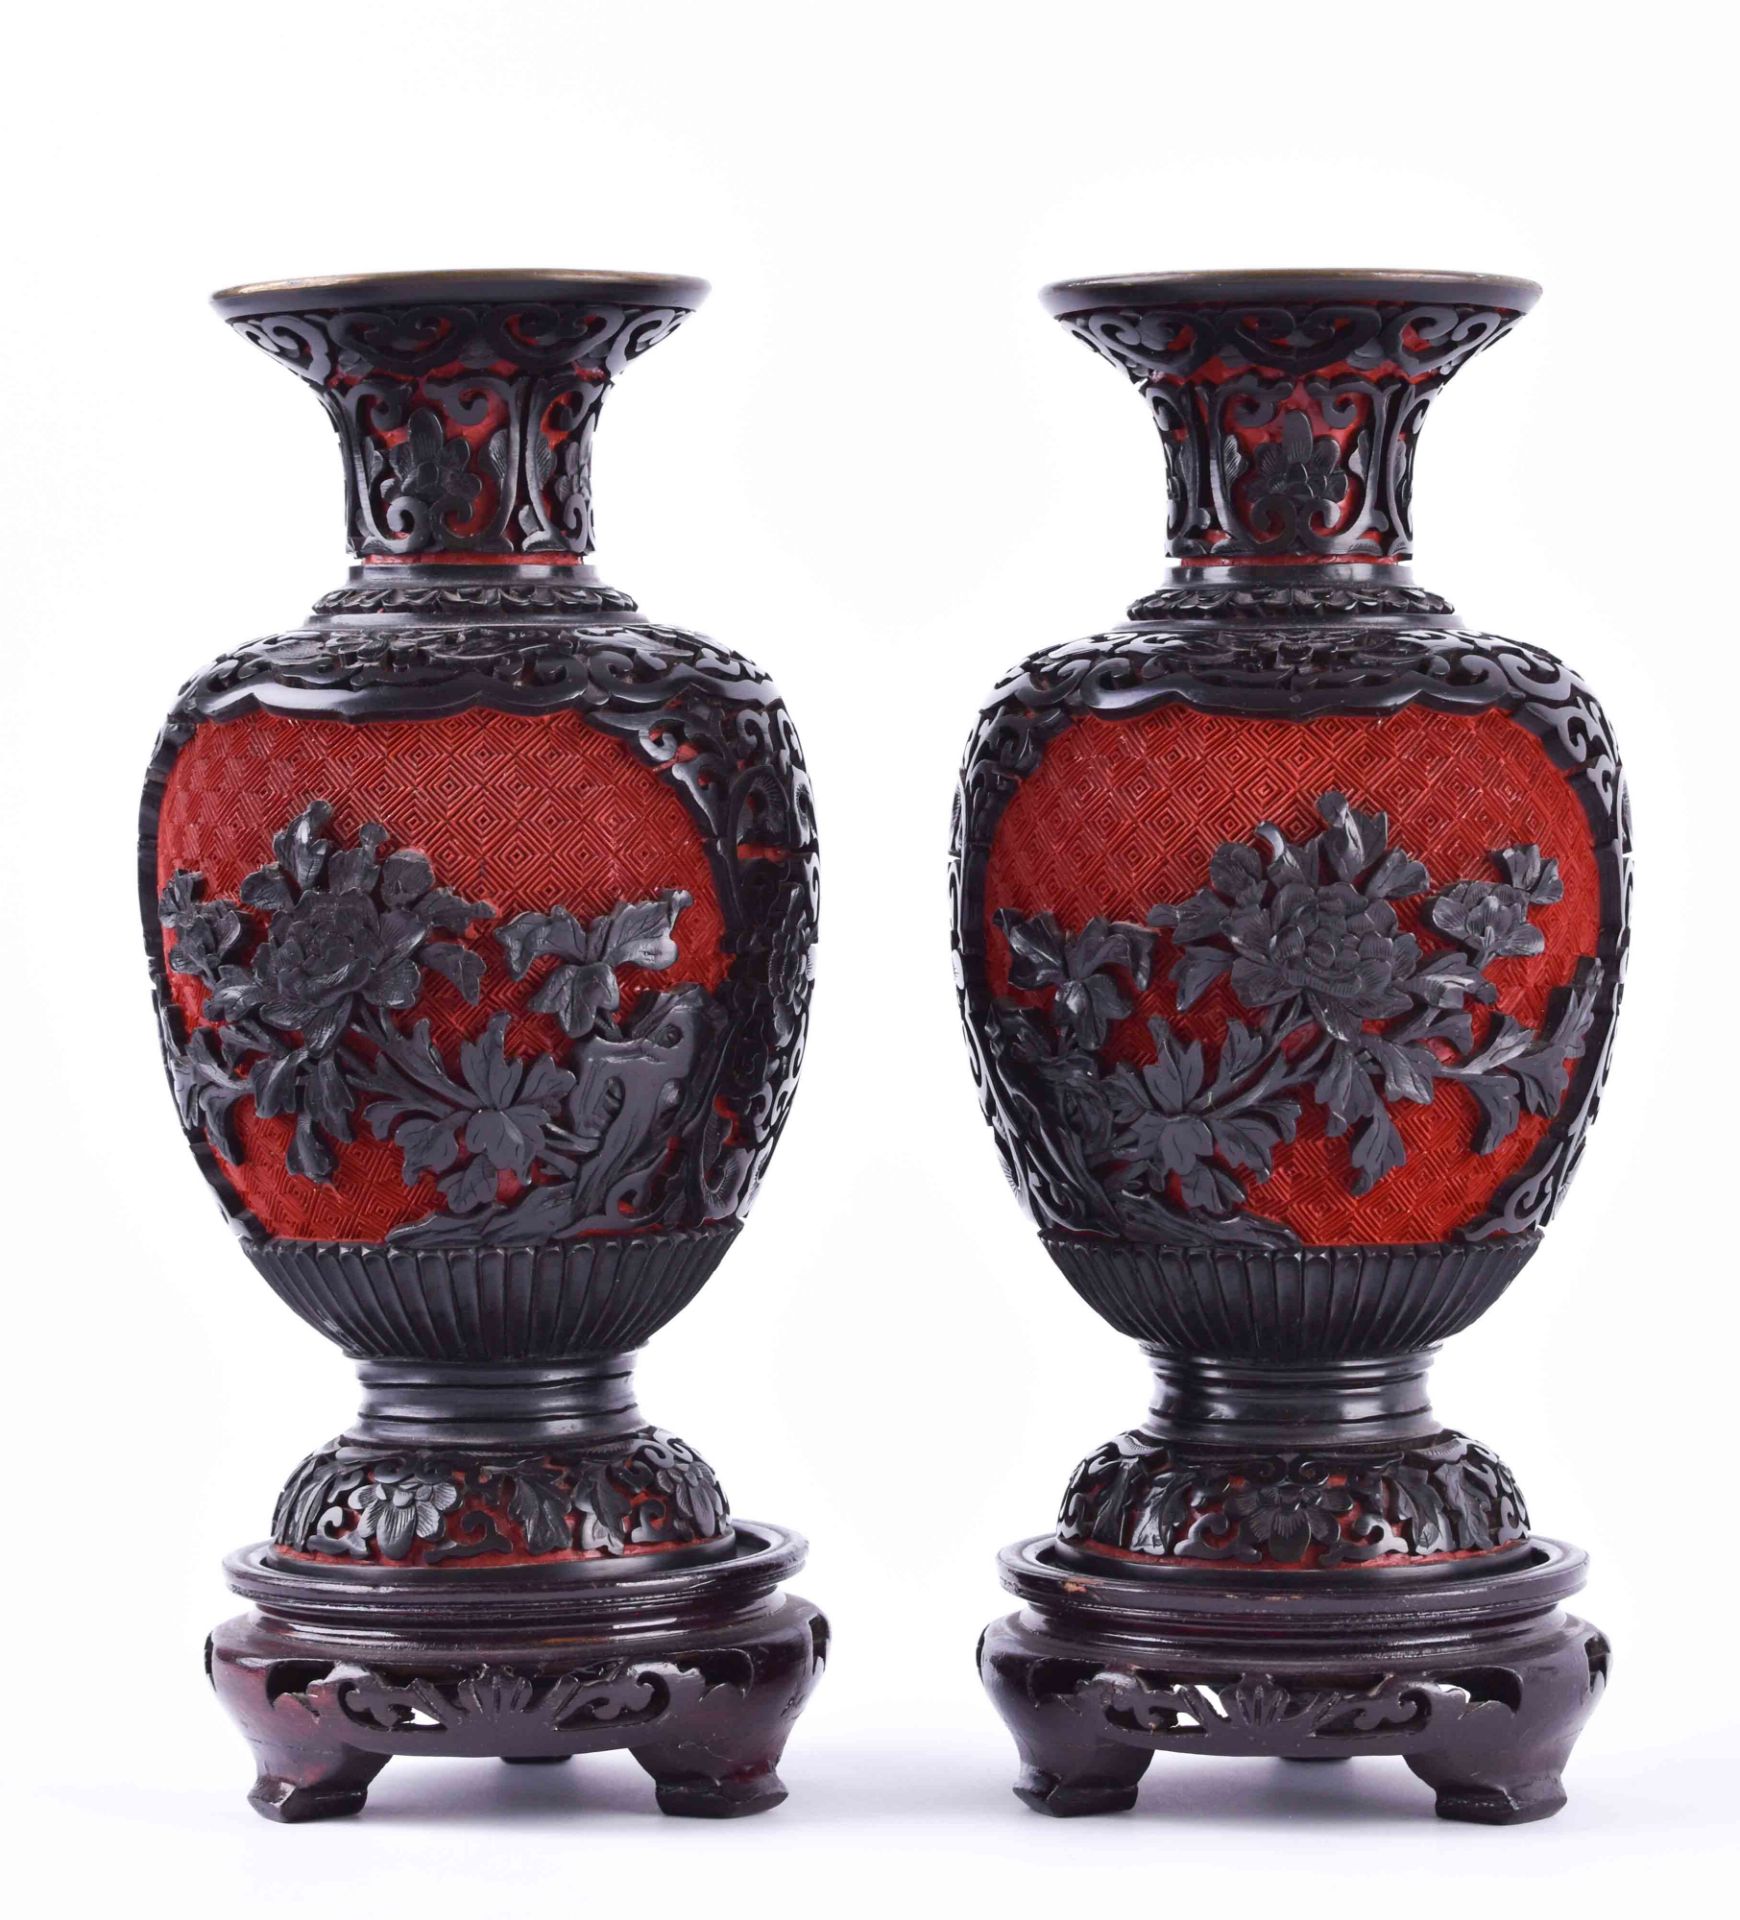 Pair of lacquer vases China 20th centuryeach standing on a wooden base, total height 21 cmPaar - Image 3 of 6